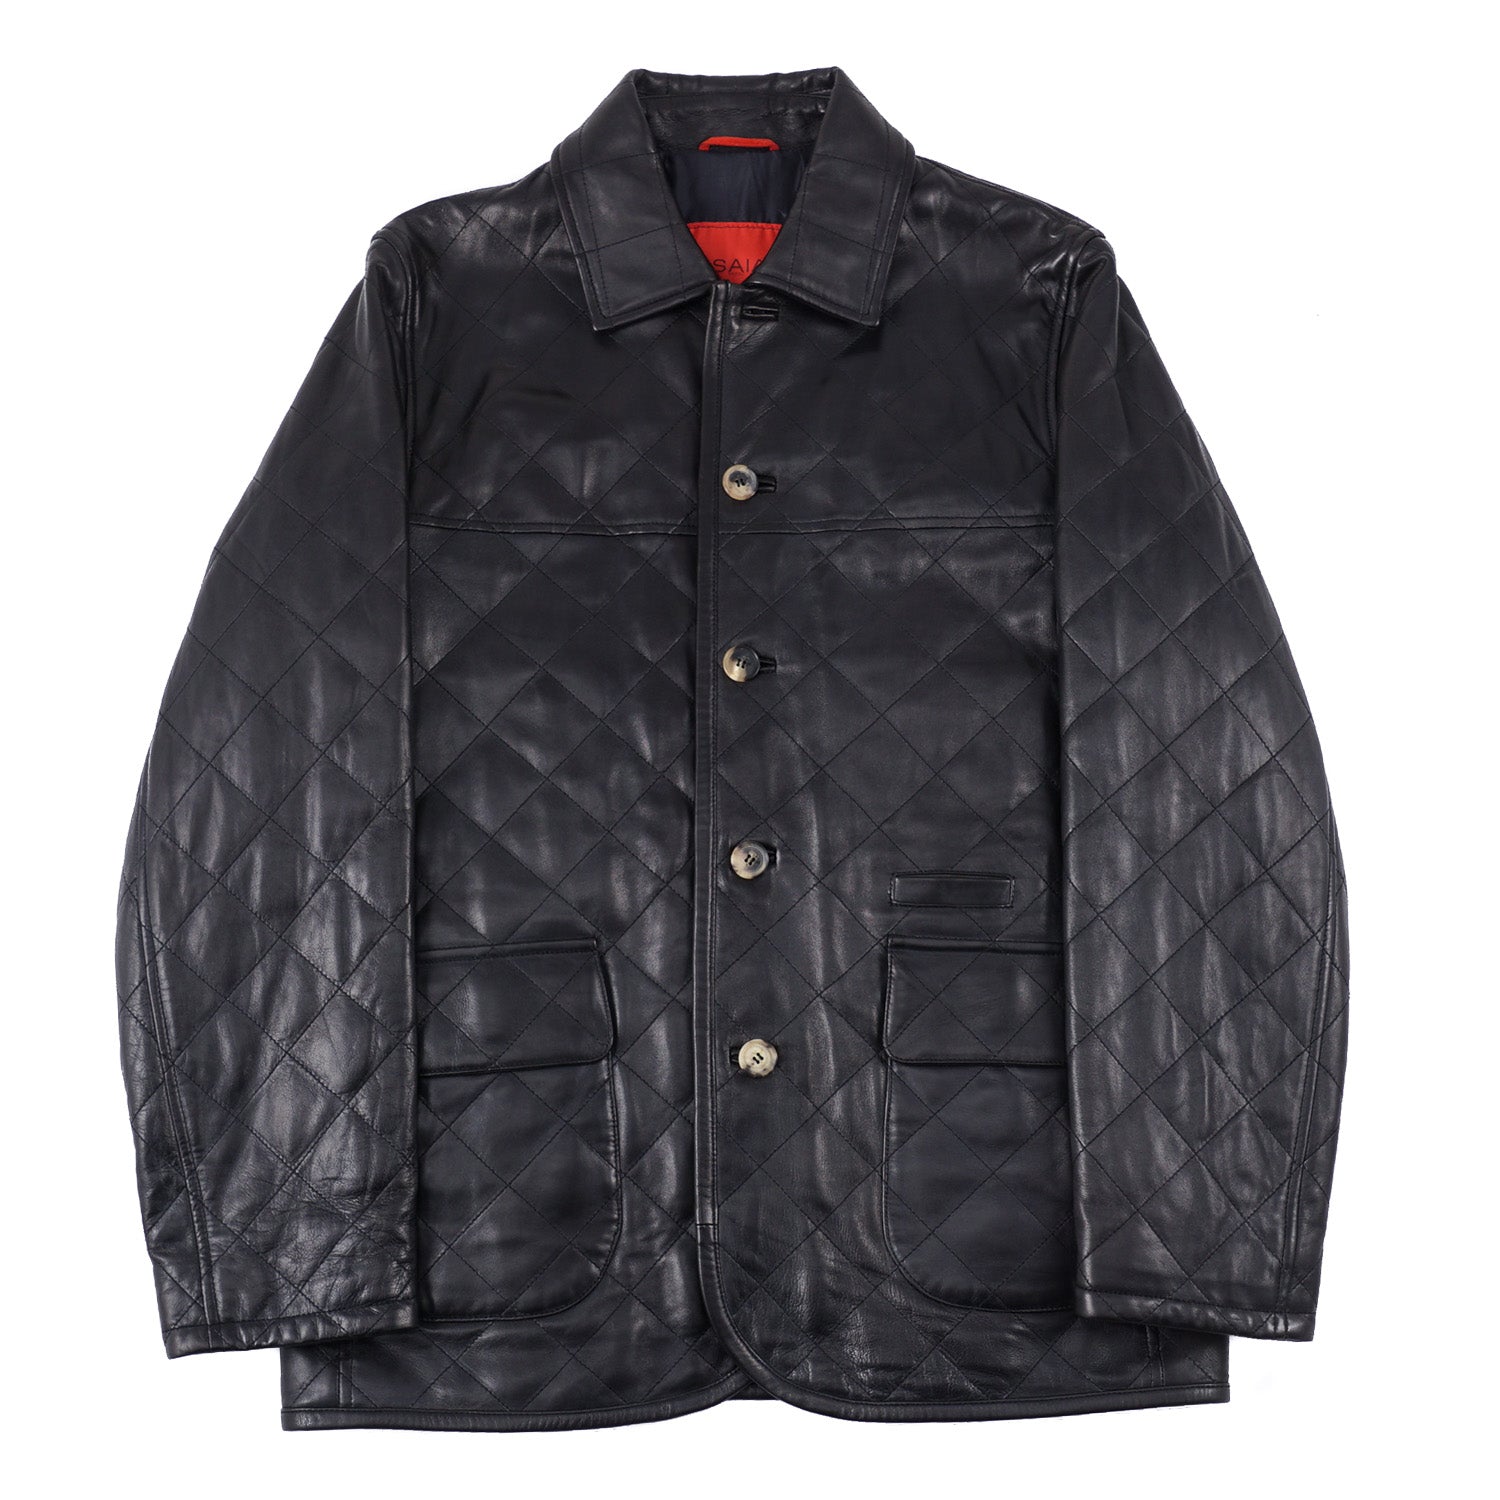 Isaia Diamond Quilted Leather Jacket in Black – Top Shelf Apparel